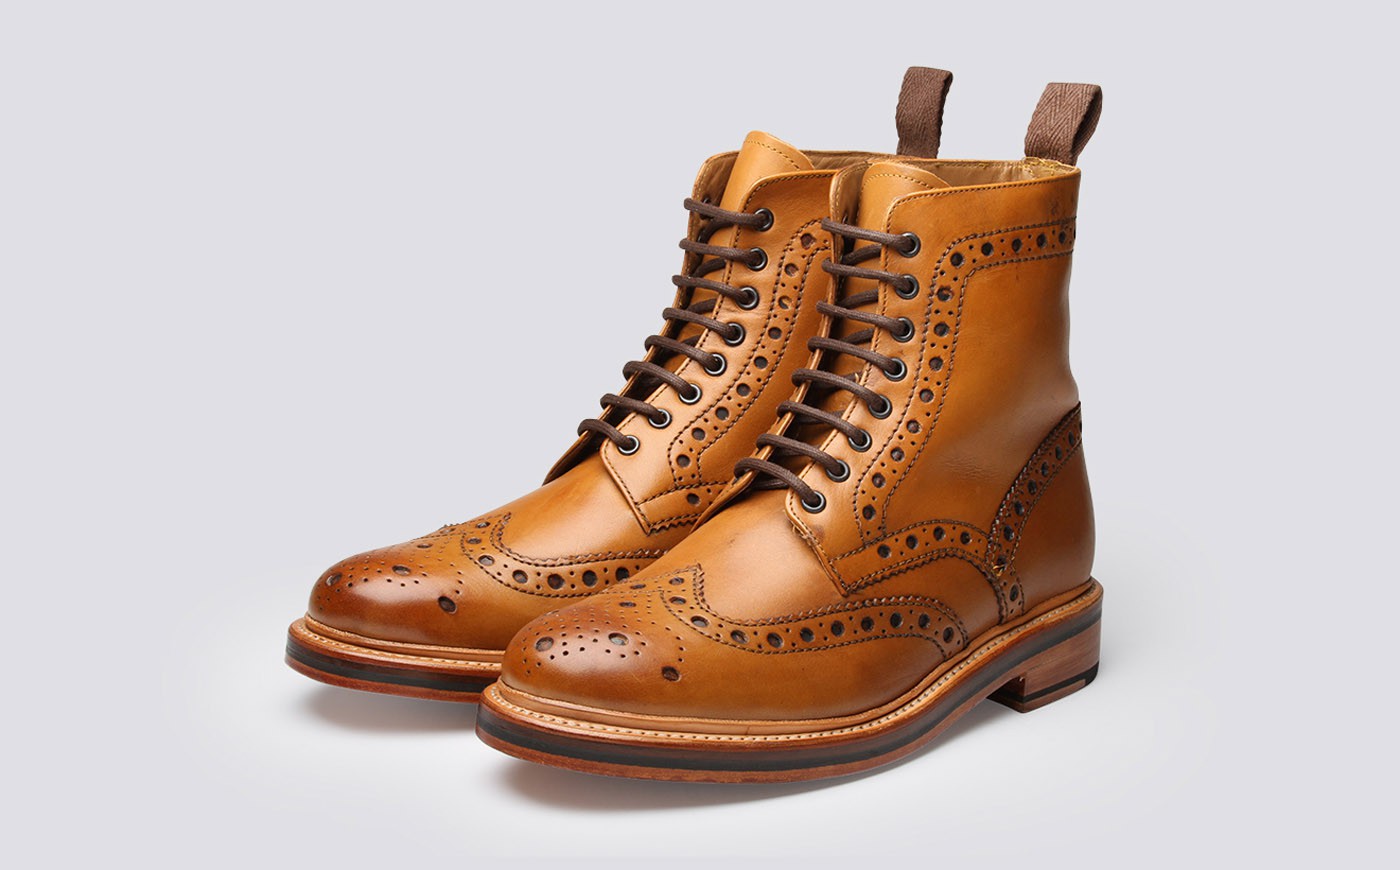 brogue boots mens brogue boot in tan calf leather with a leather sole | fred | grenson ggyhqwb